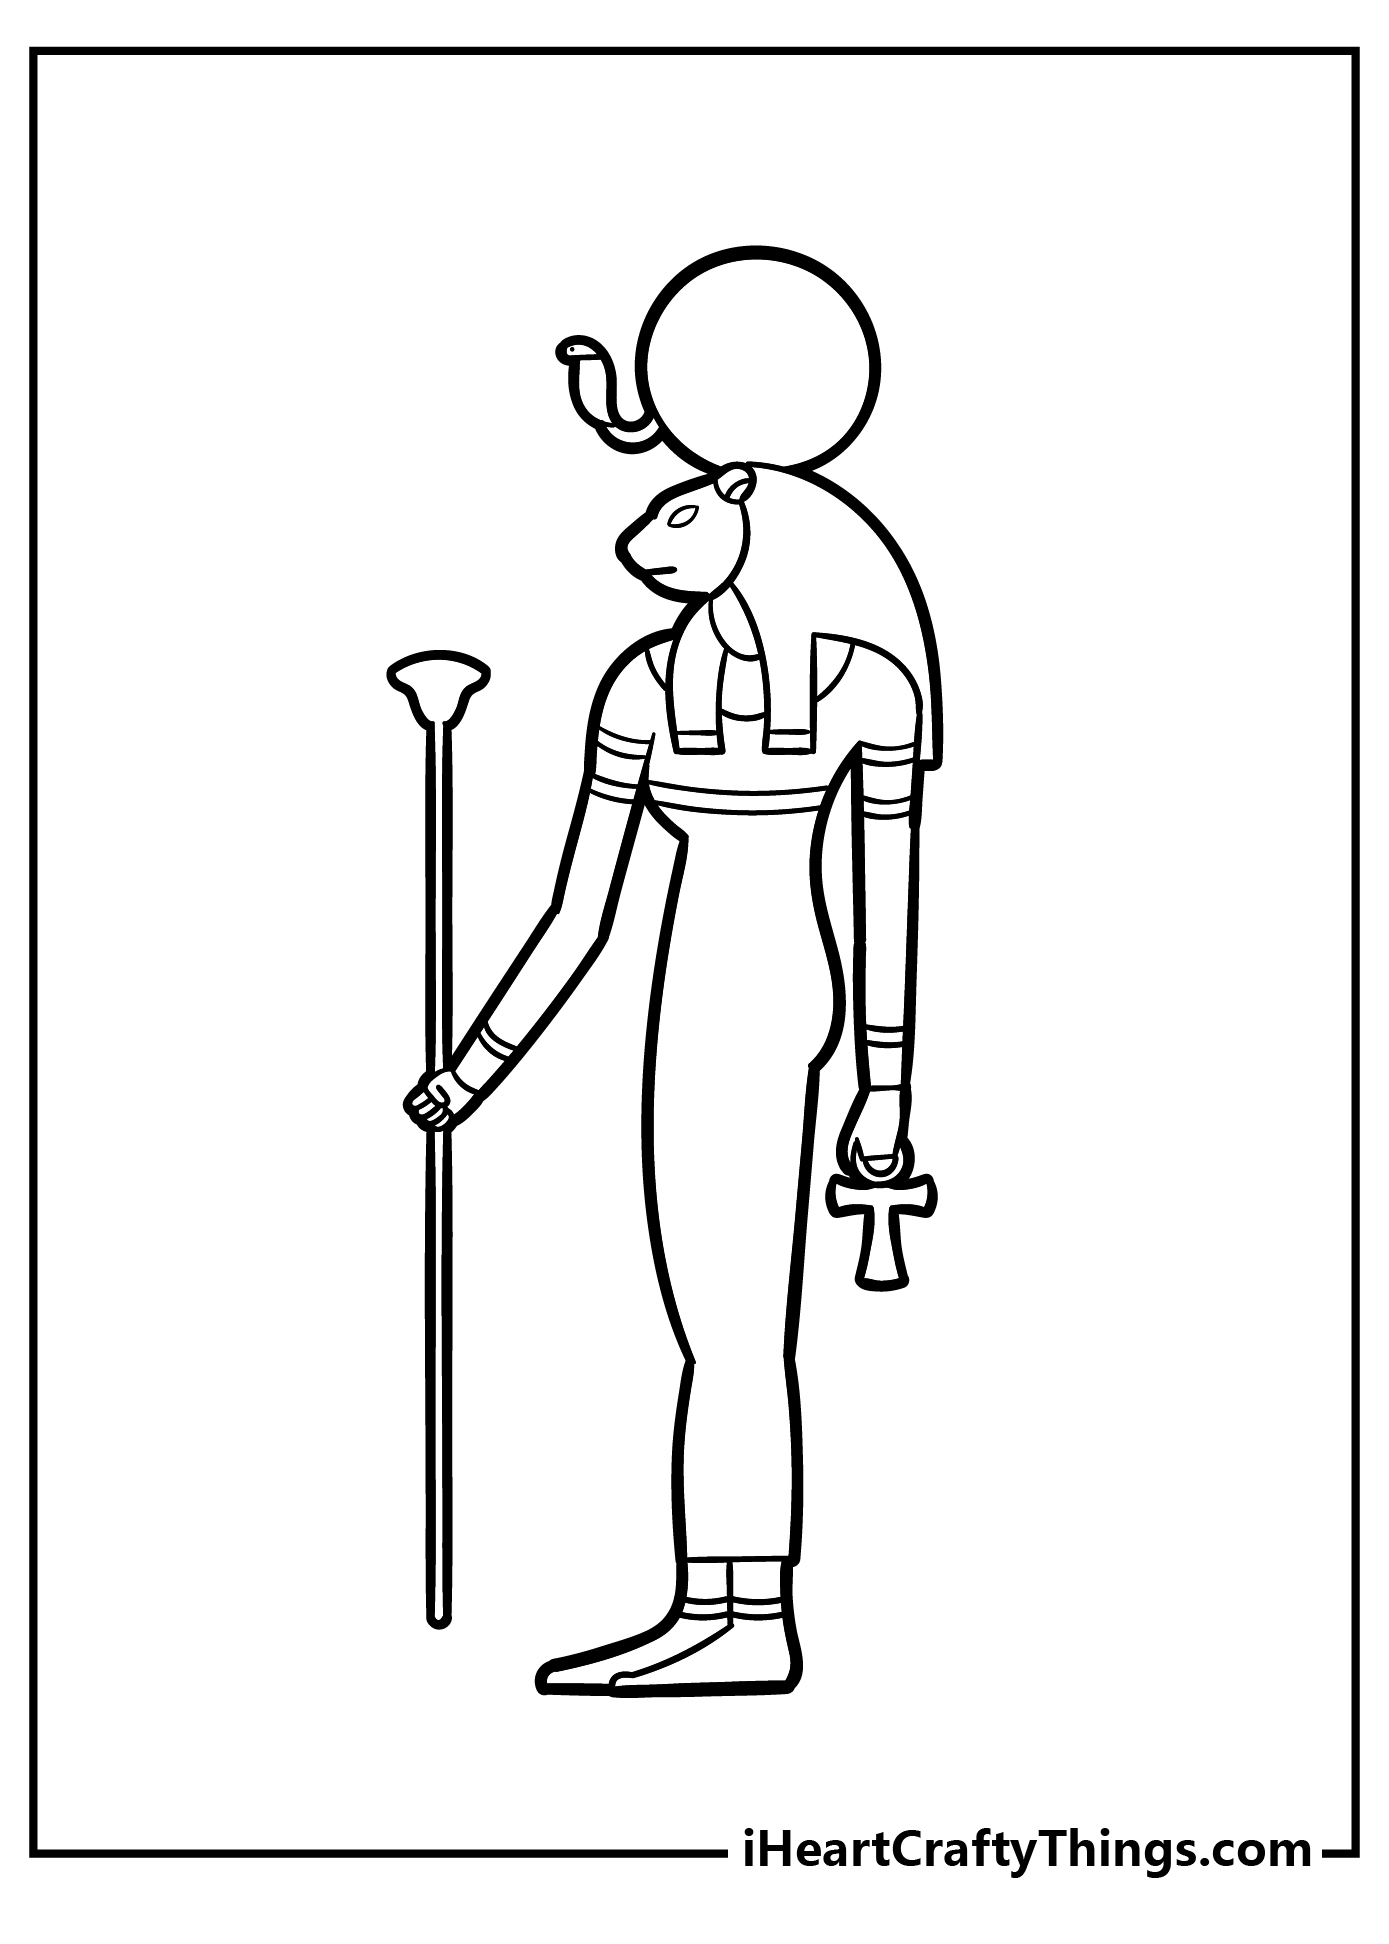 Egyptian Coloring Original Sheet for children free download